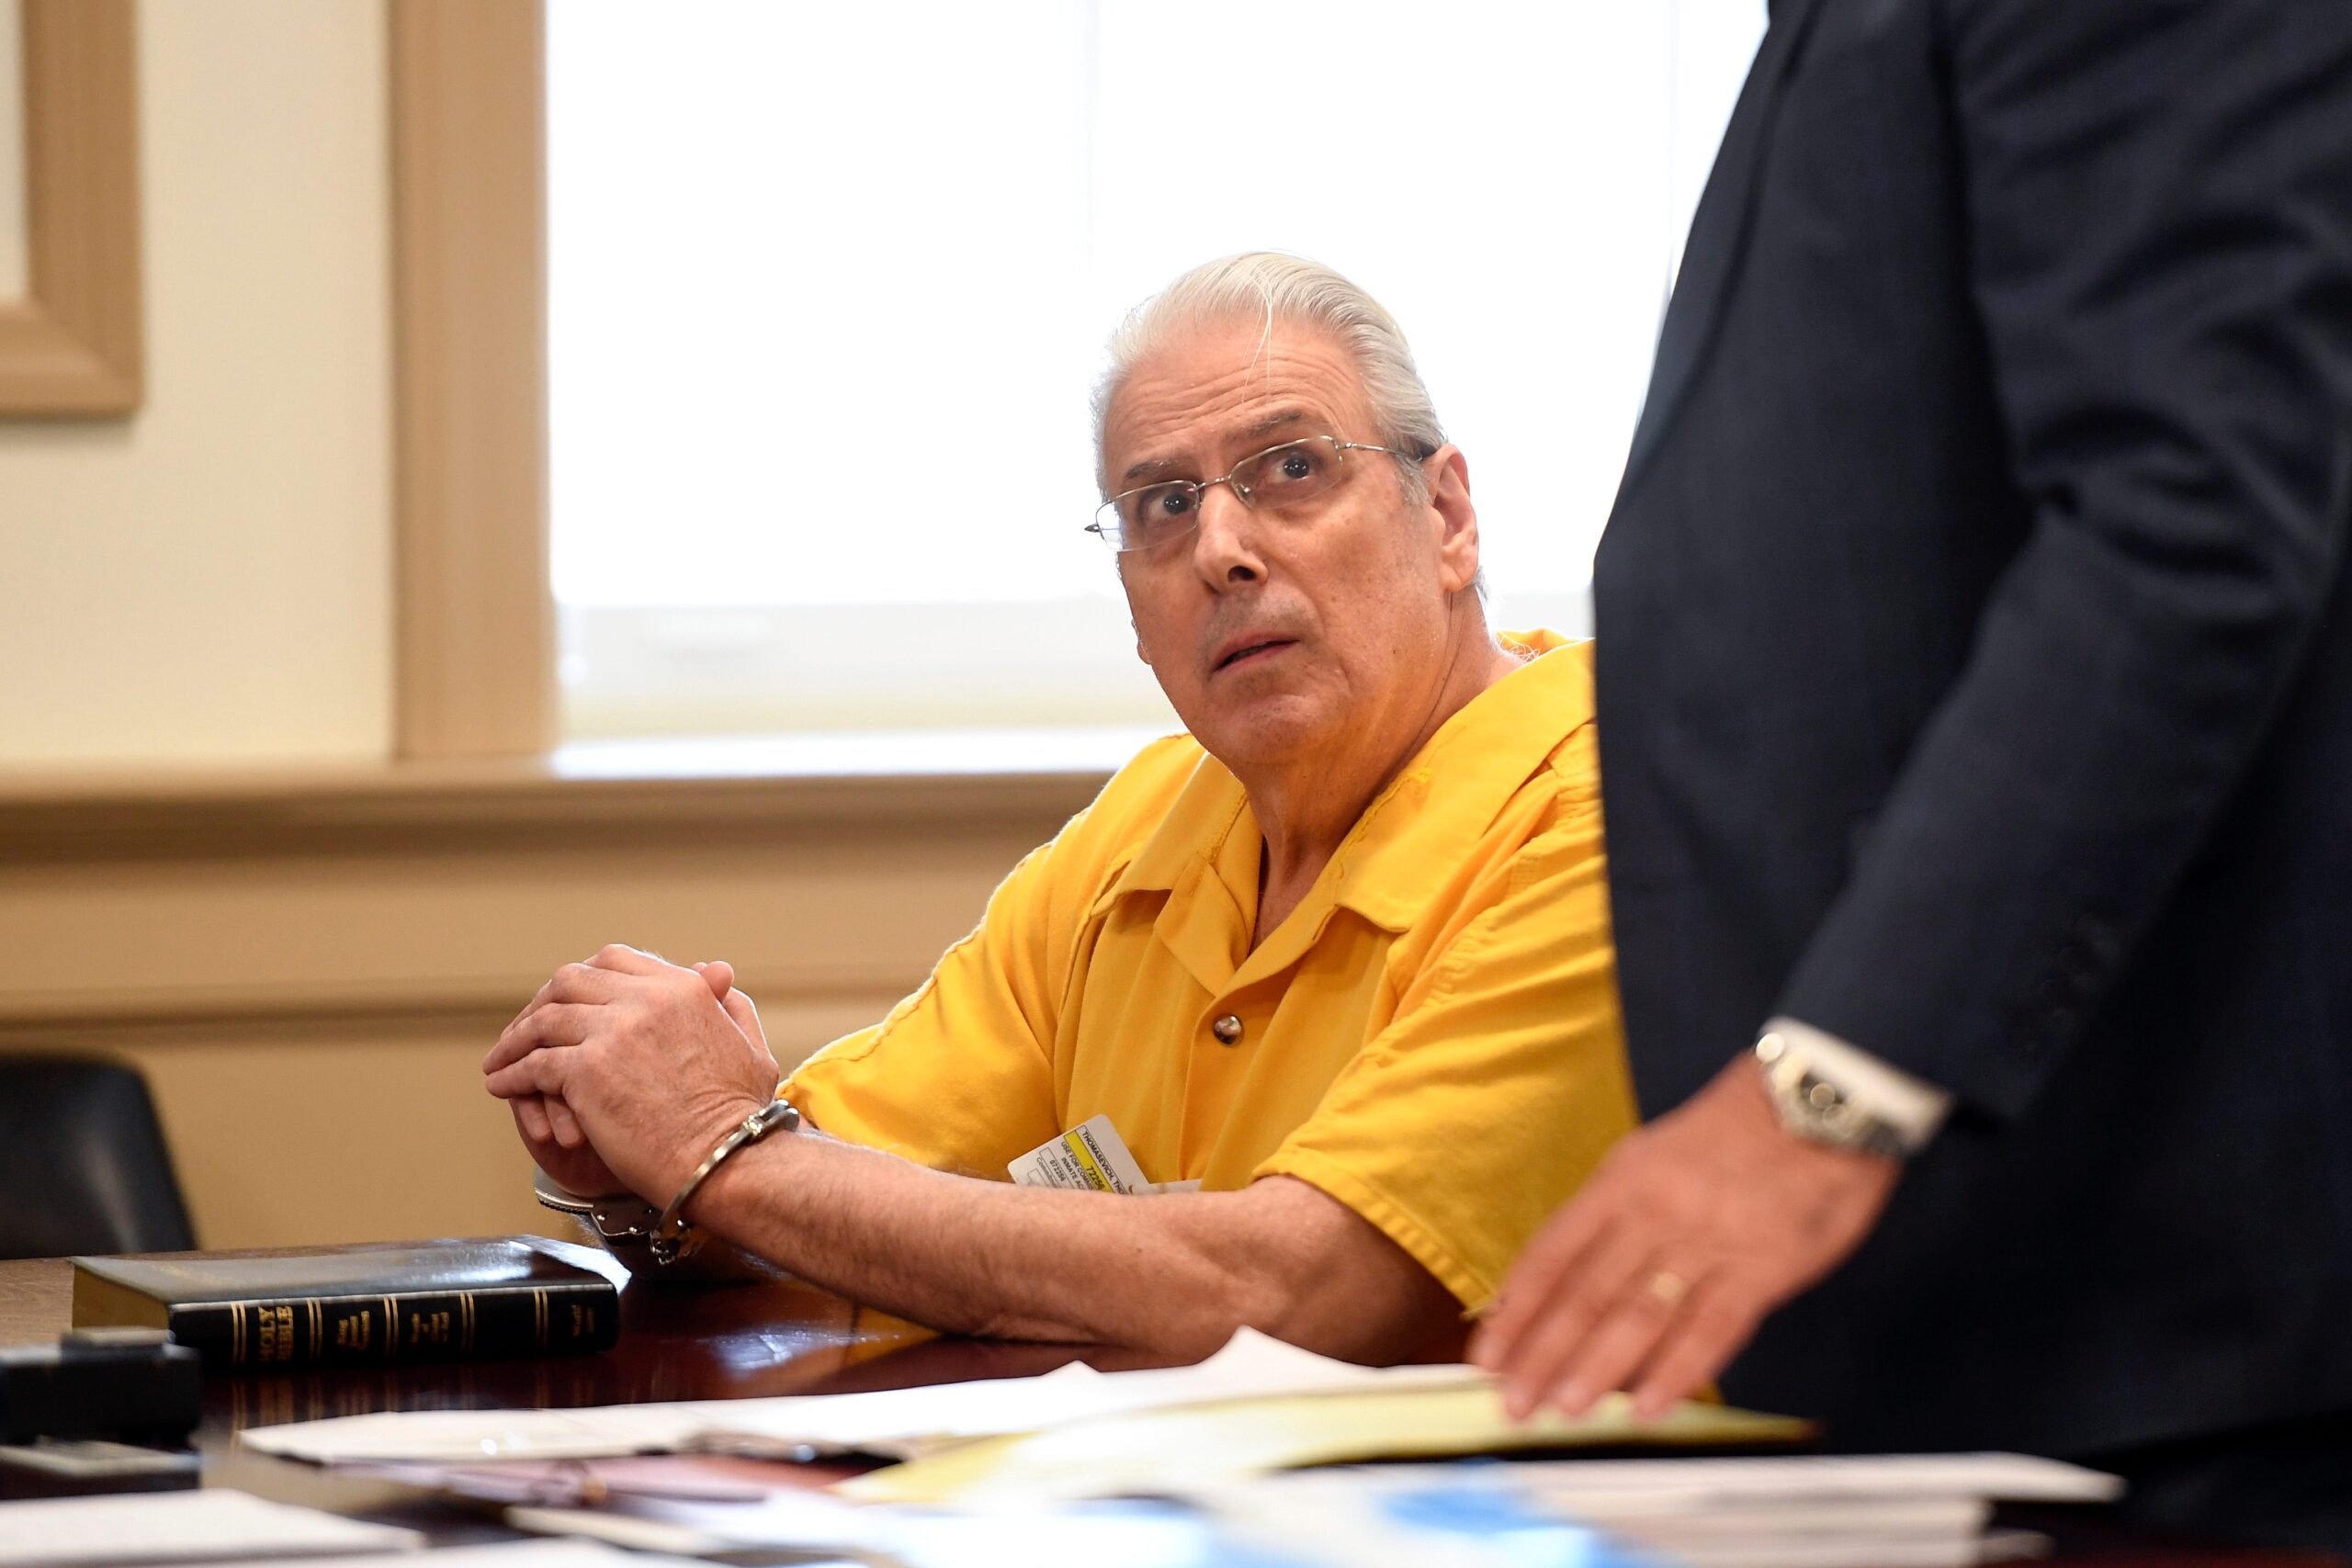 New Jersey school bus driver who pleaded guilty to molesting two kids gets no prison time